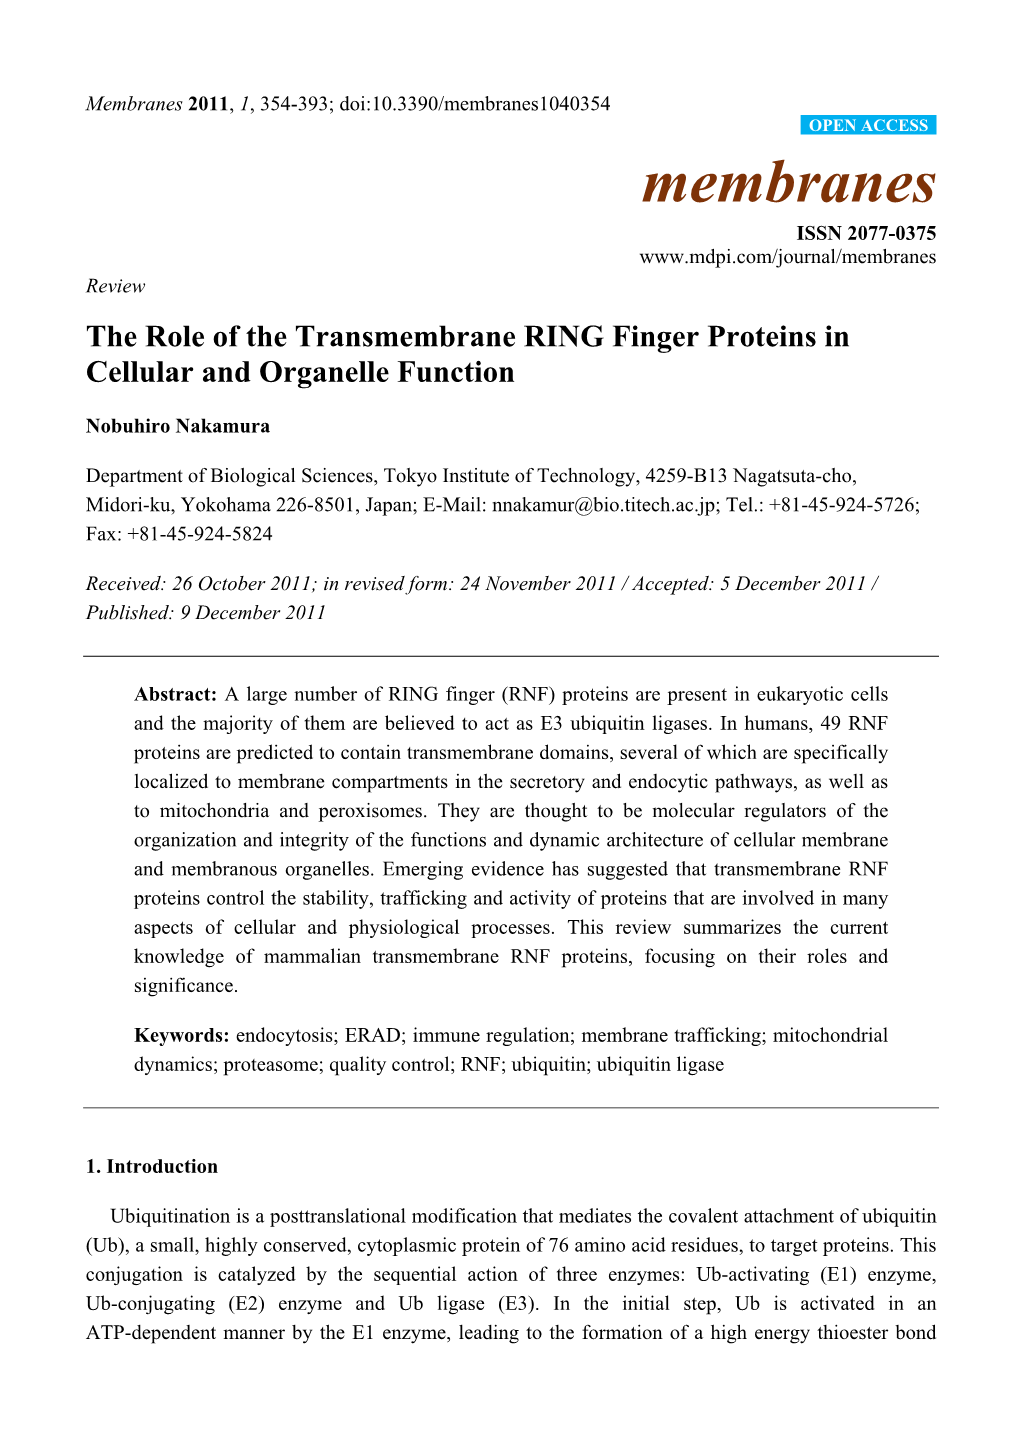 The Role of the Transmembrane RING Finger Proteins in Cellular and Organelle Function